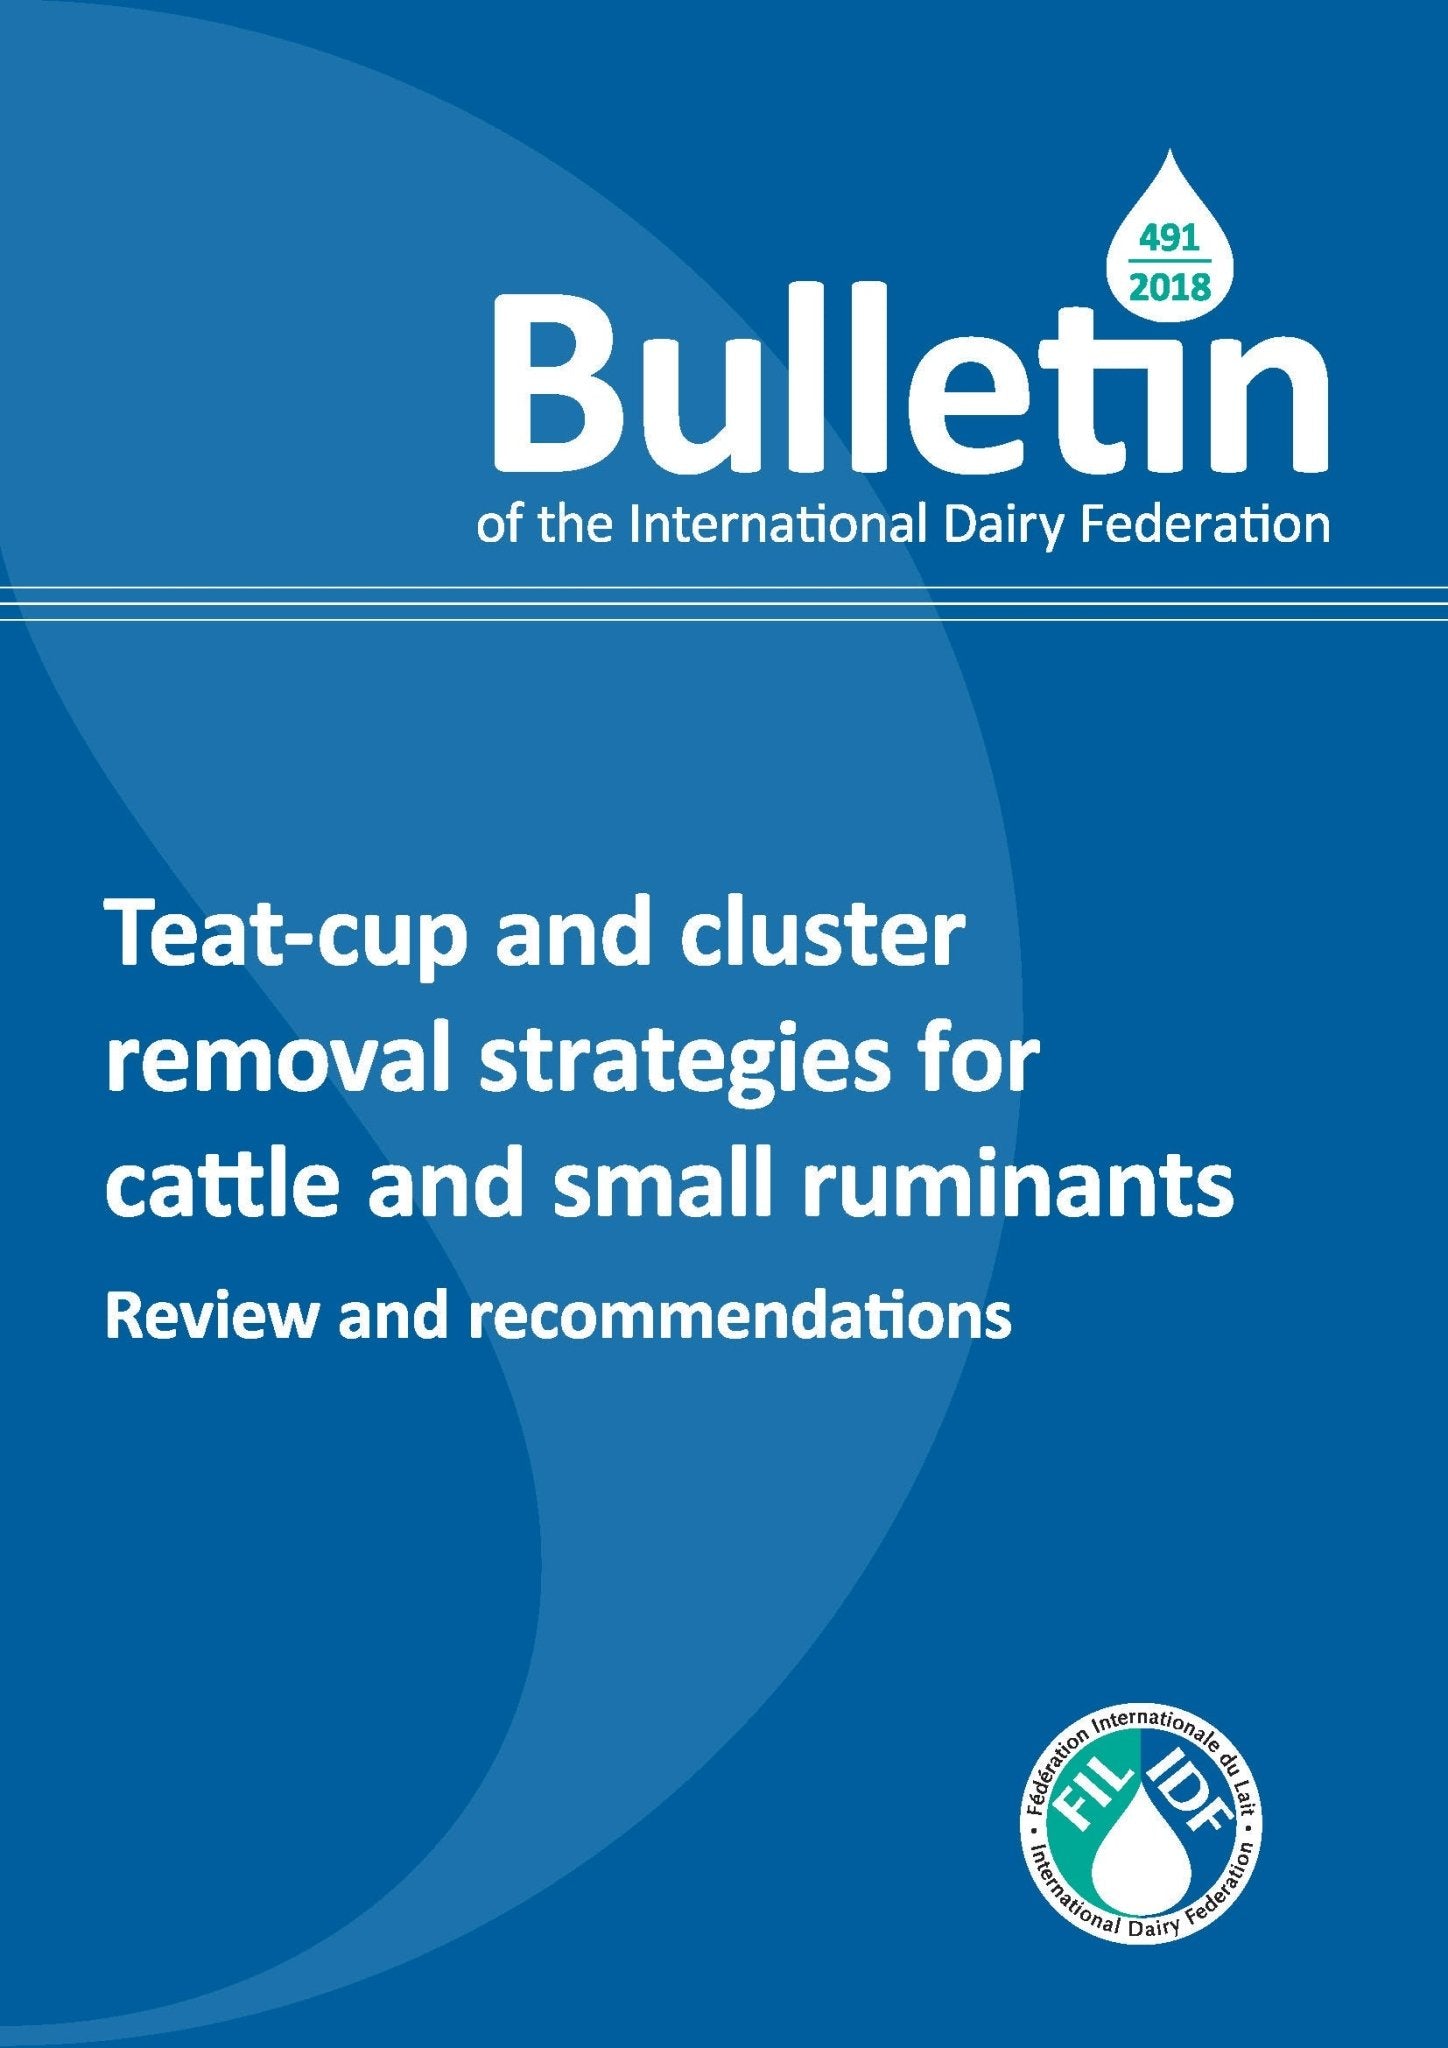 Bulletin of the IDF N° 491/ 2018: Teat-cup and cluster removal strategies for cattle and small ruminants, Review and recommendations - FIL-IDF